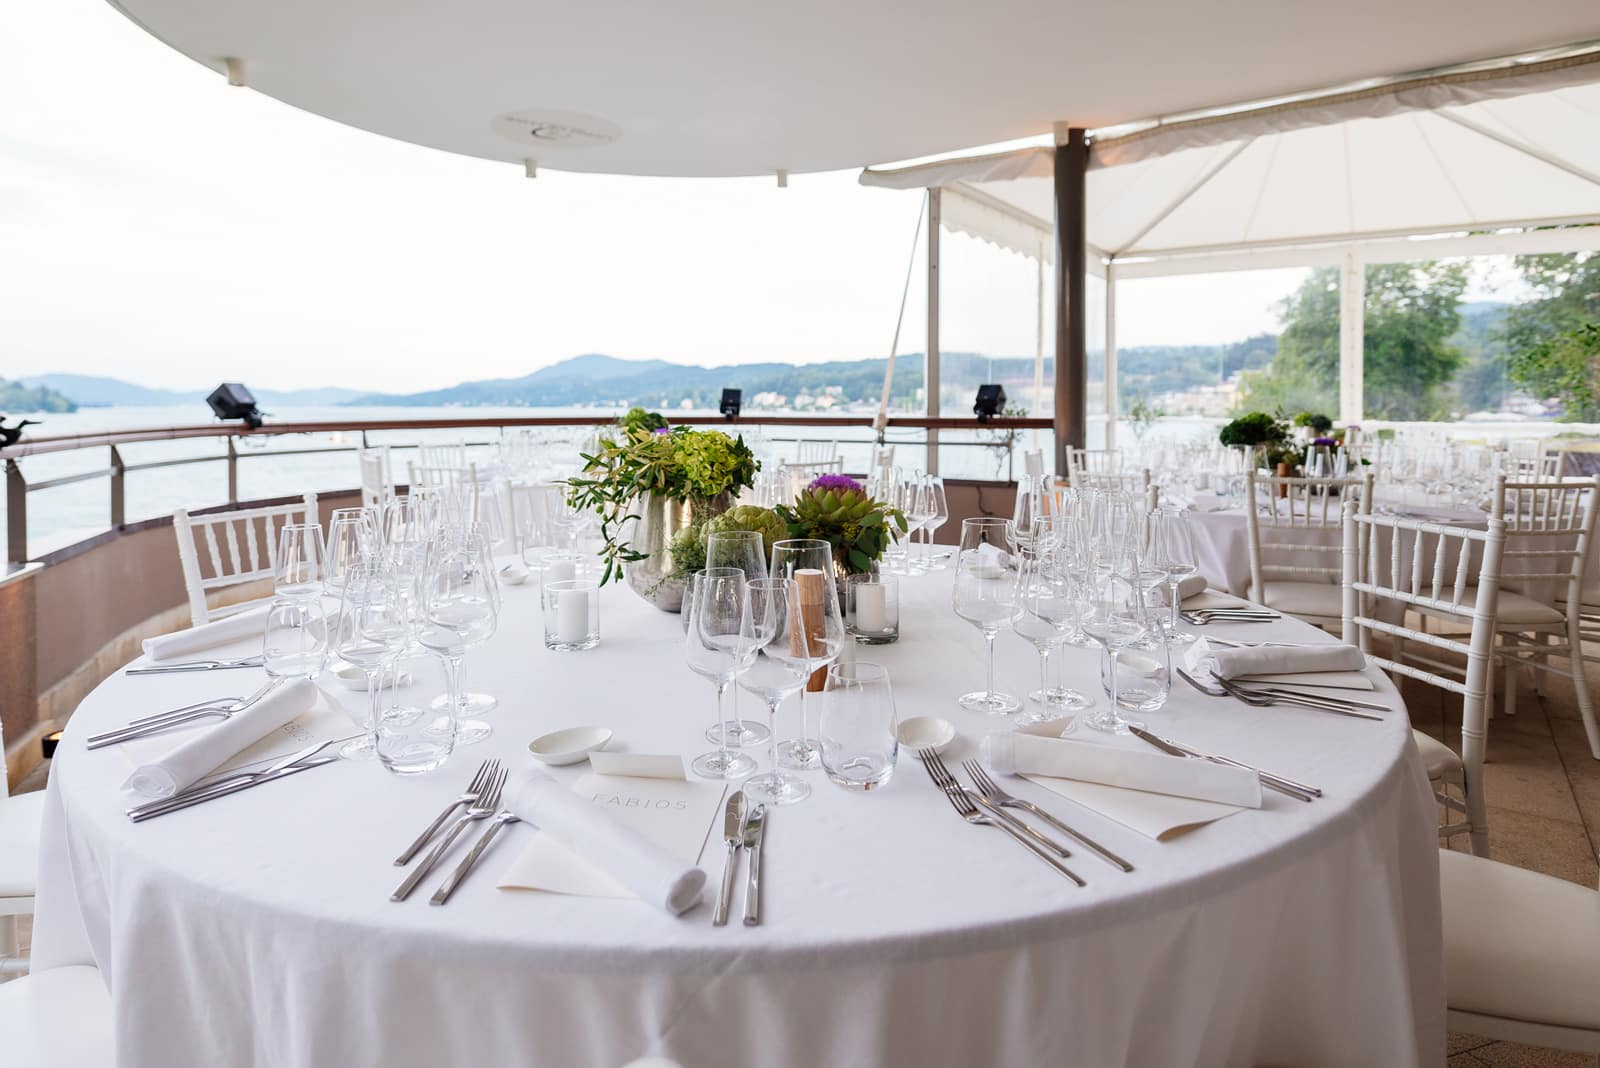 The LIVING DELUXE Summer-Highlight at Lake Wörthersee - LIVING DELUXE